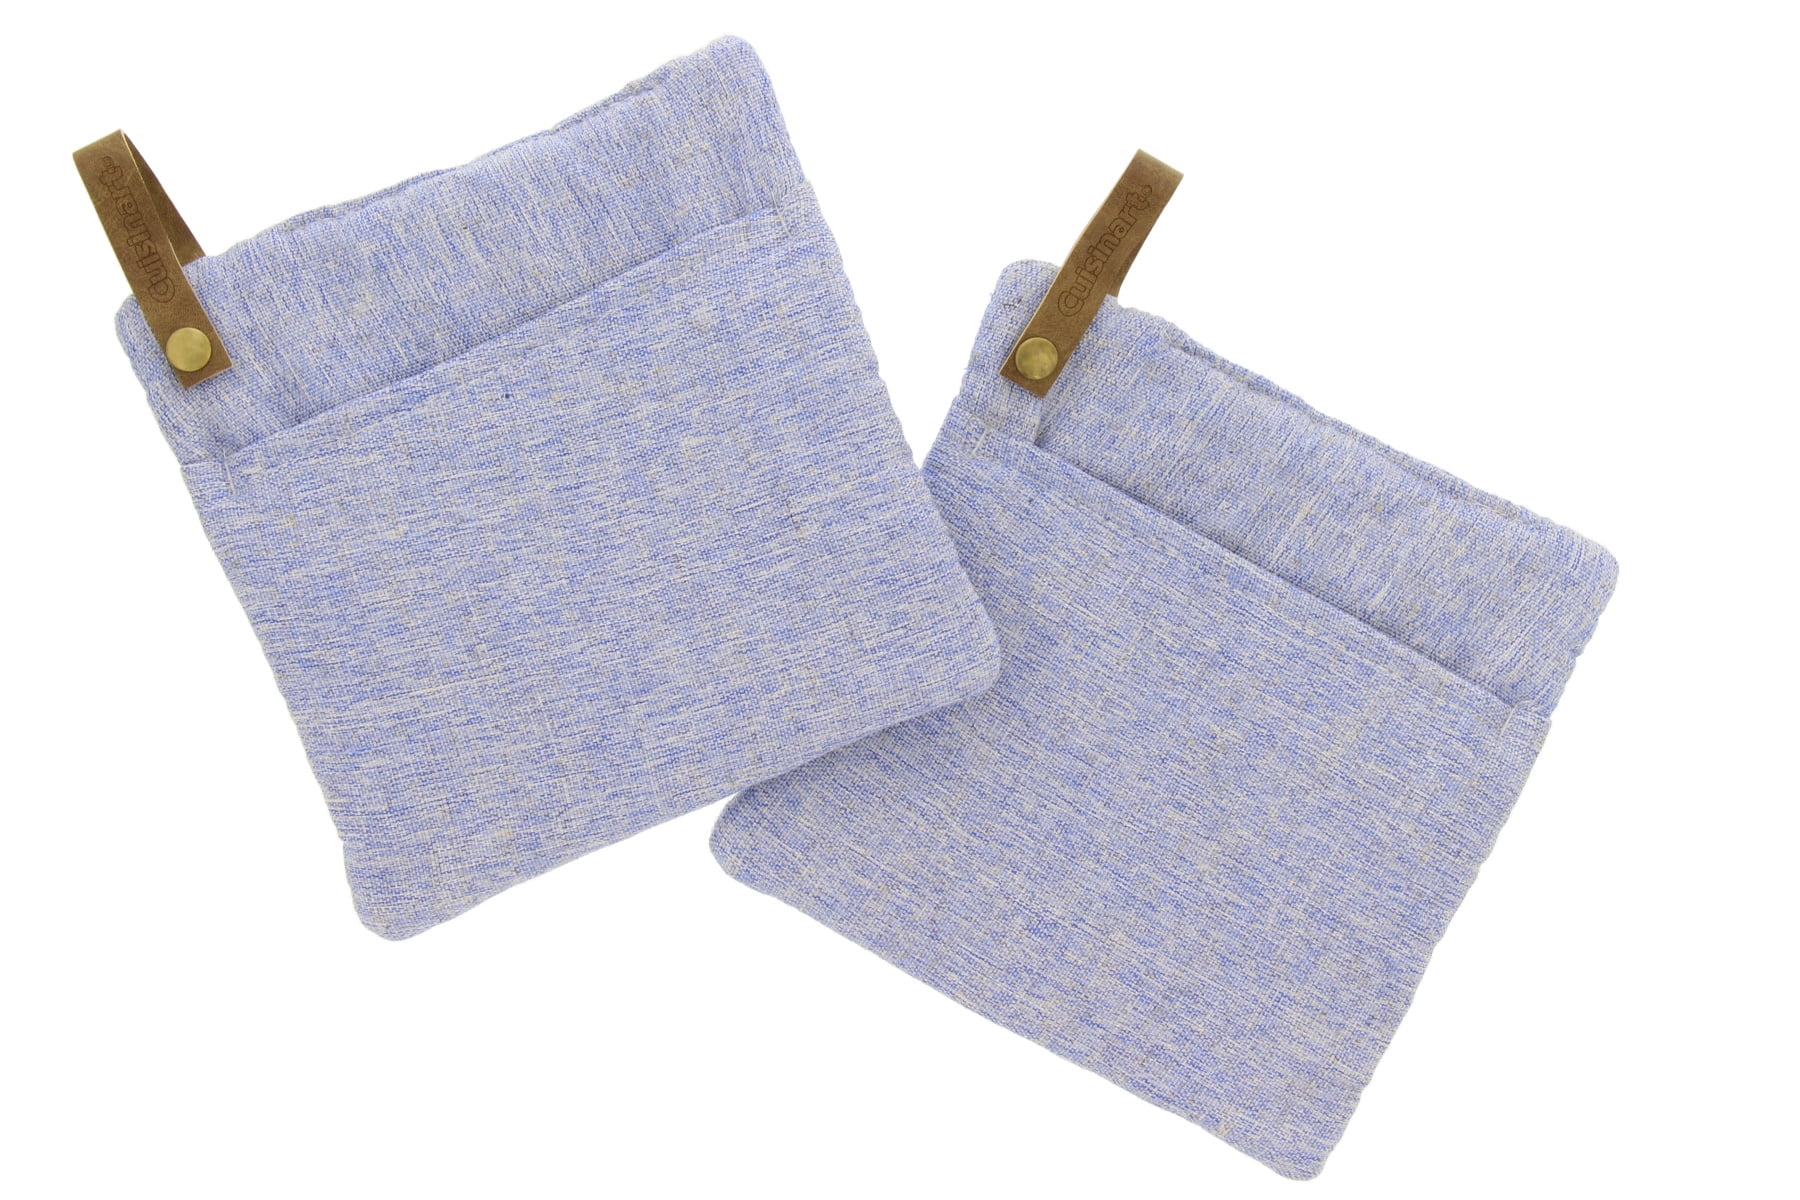 Cuisinart Space Dyed Linen-Look Oven Mitts with Leather Straps, Set of 2